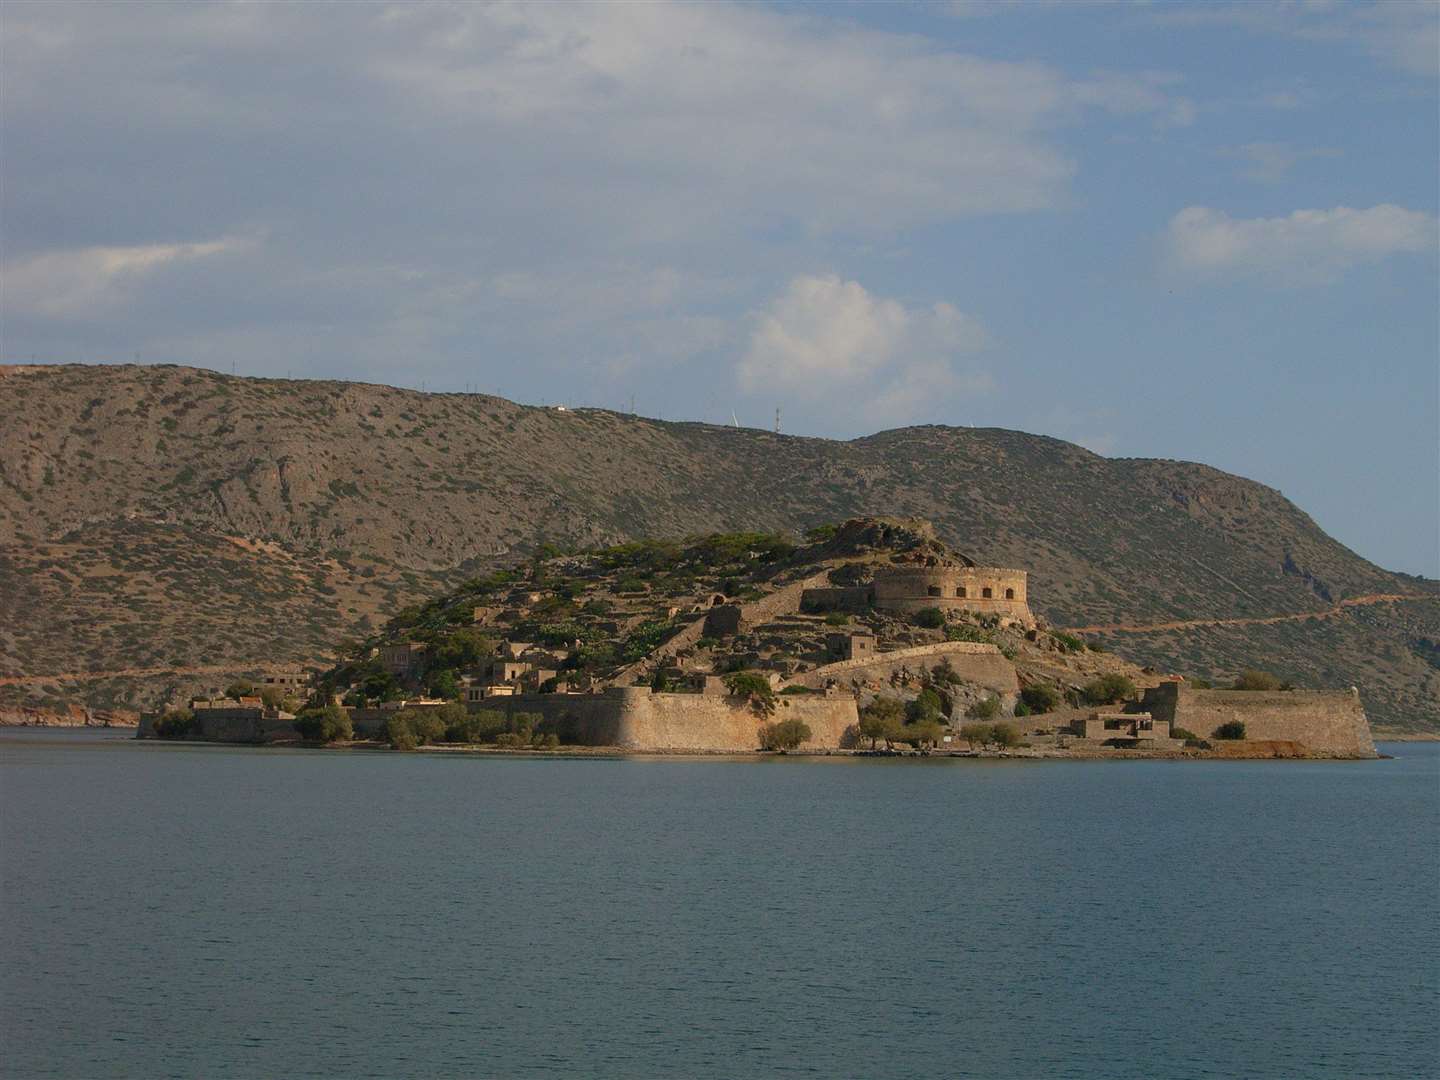 The photo is of the tiny island called Spinalonga, once Greece's leper colony - a place of permanent lockdown.